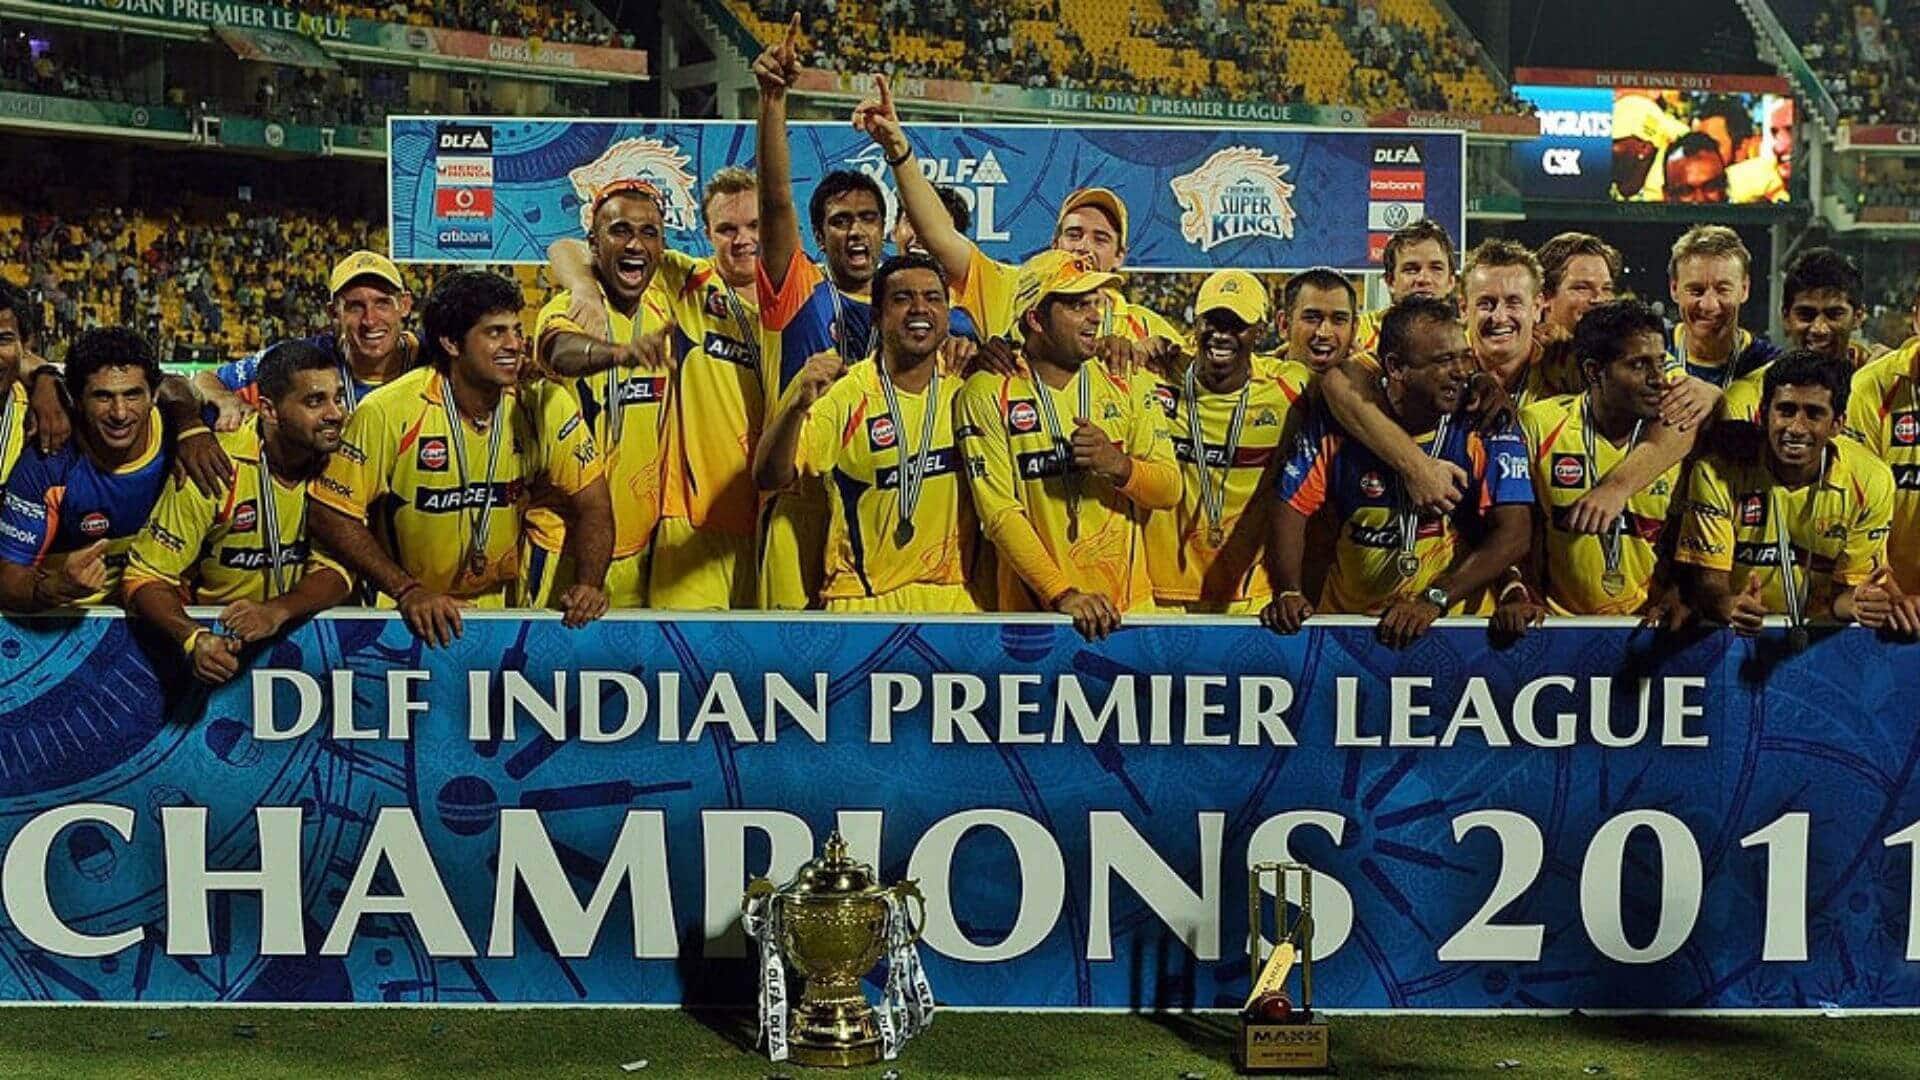 CSK crushed RCB in the final to win the IPL 2011 [x.com]